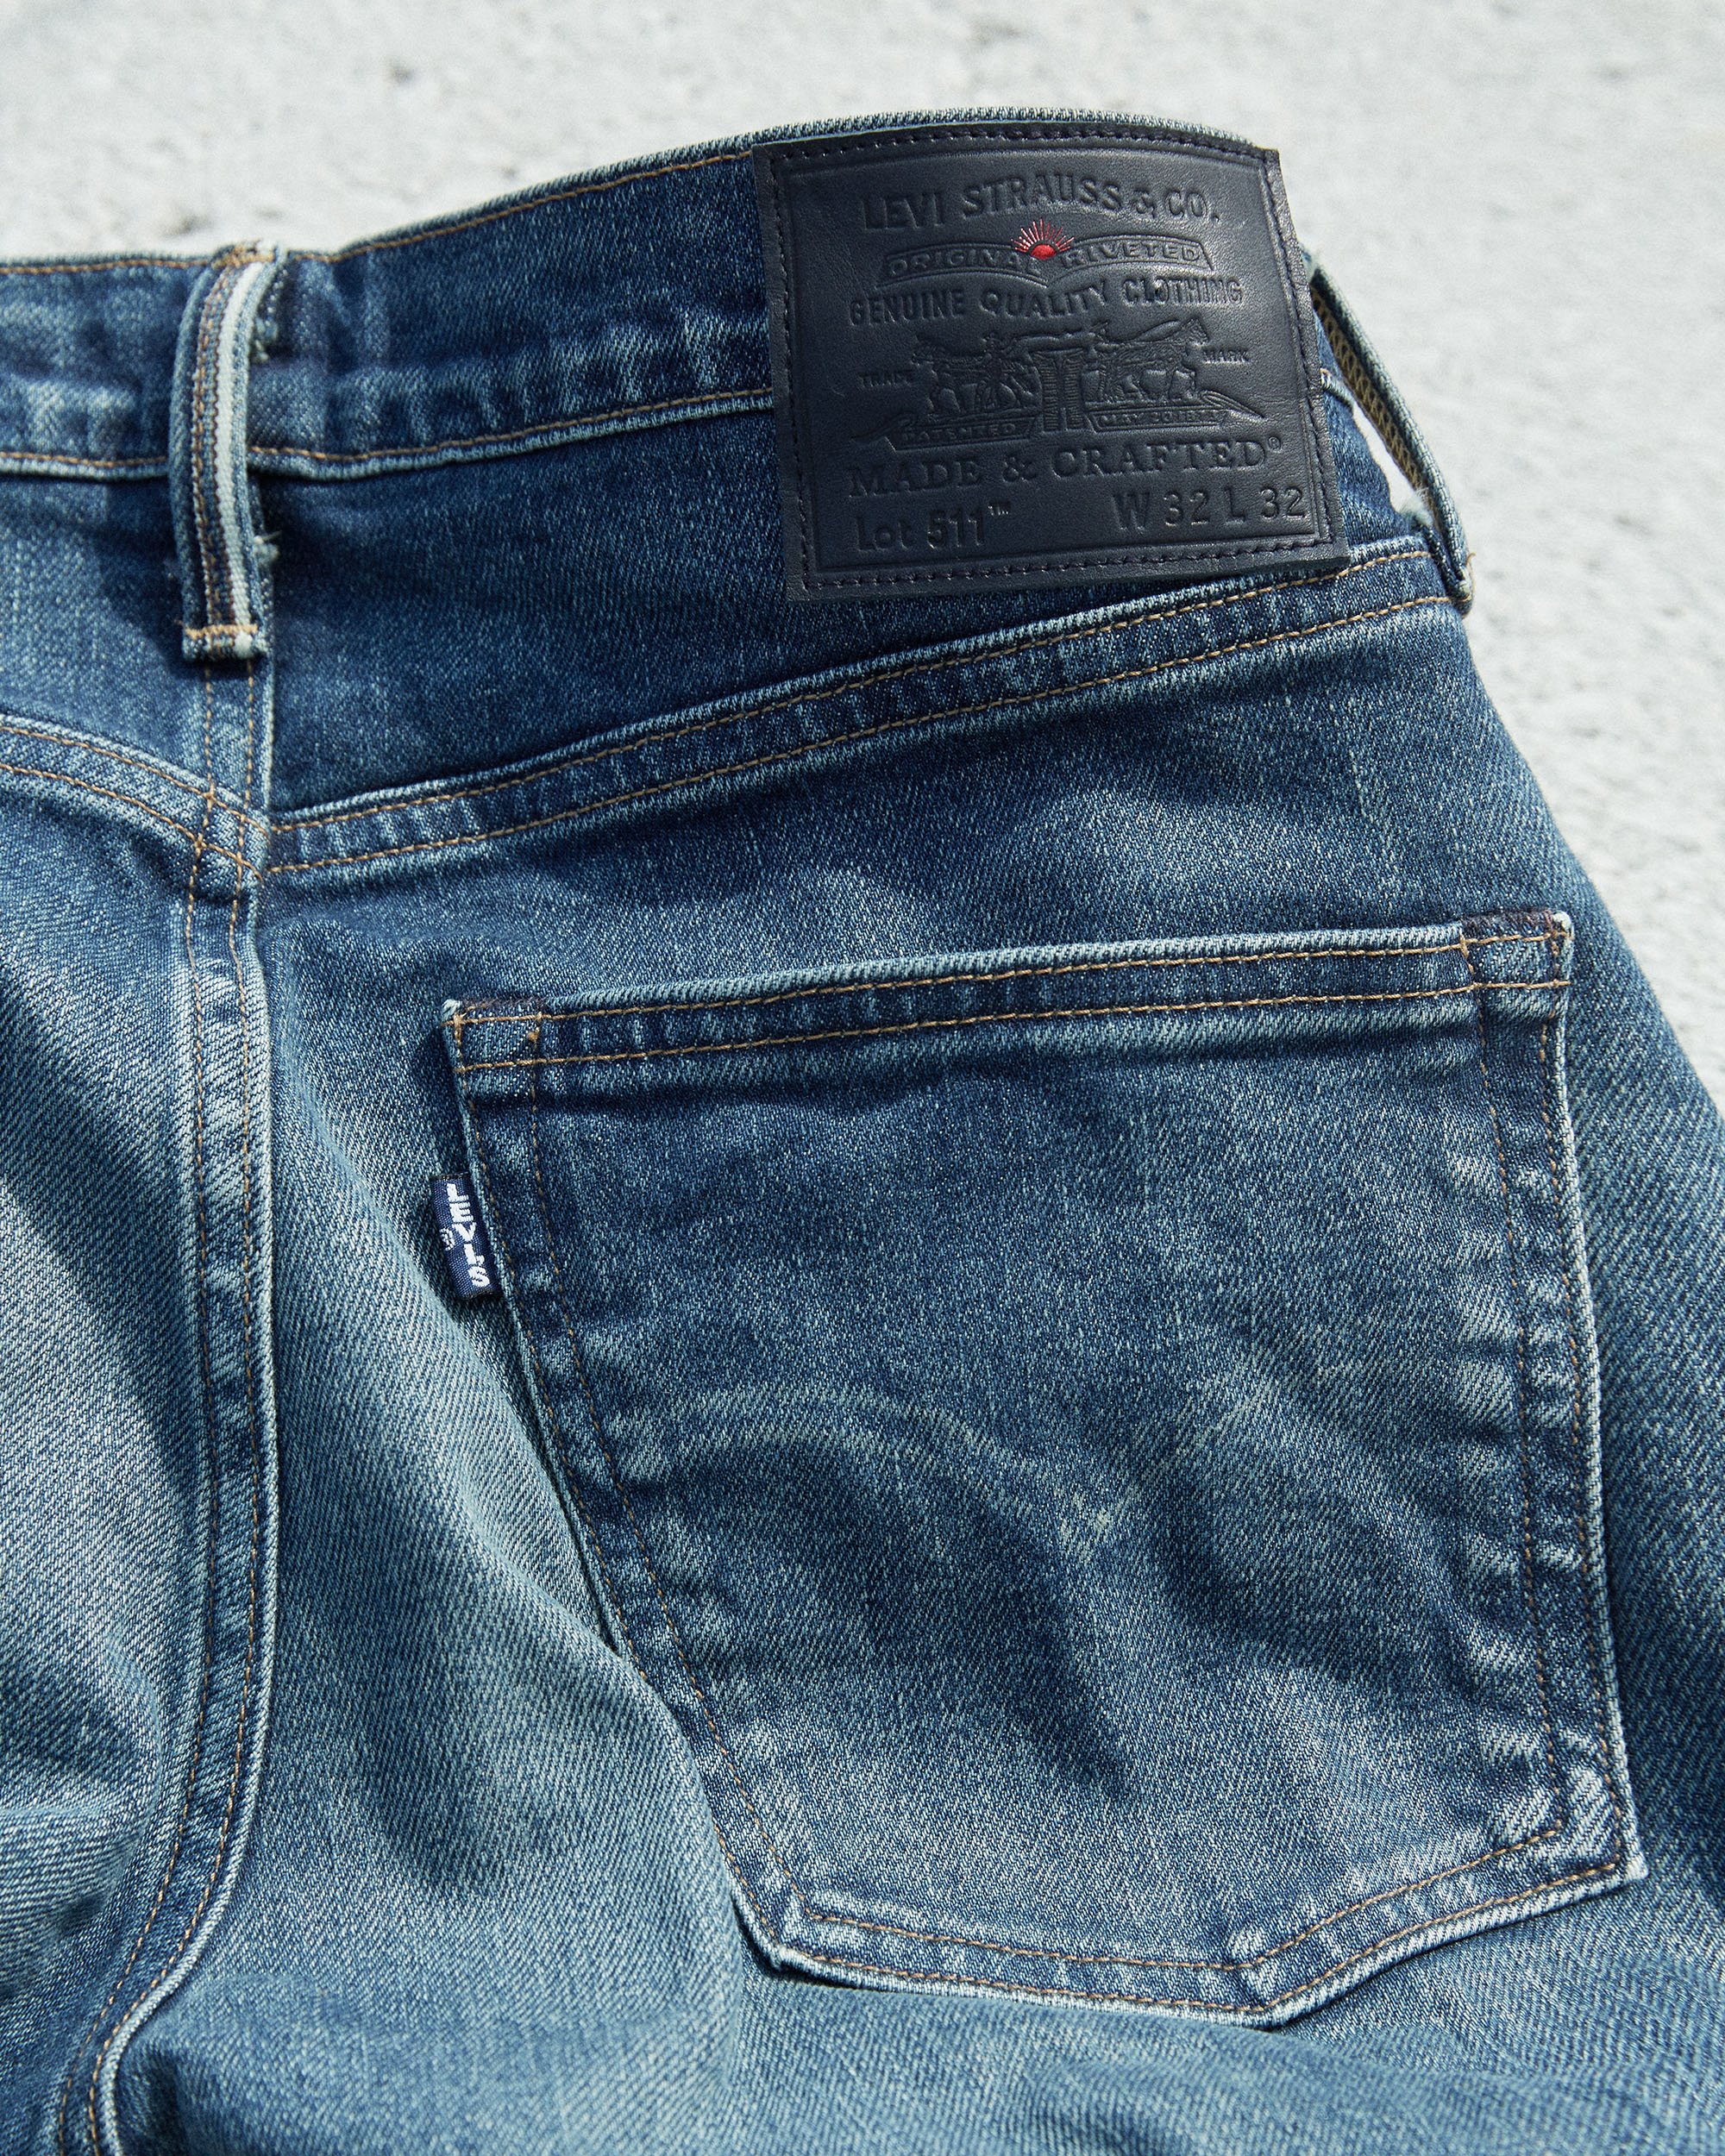 The Back View of Levi's Made in Japan Collection Jeans - Levi's Hong Kong